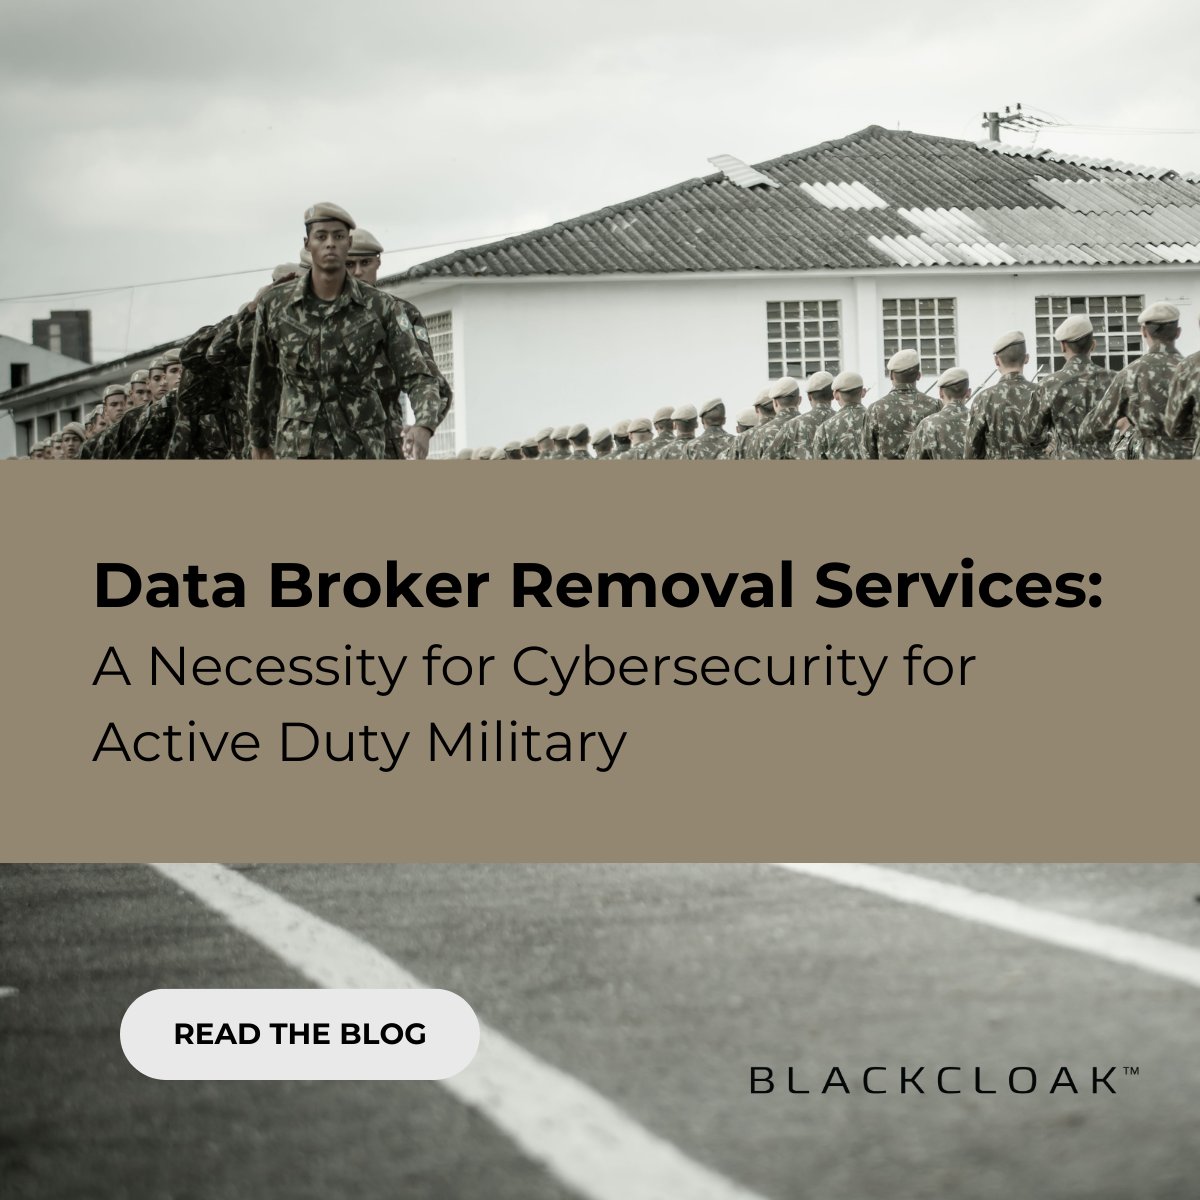 A shocking Duke University study reveals that personal data of active-duty U.S. military is easily bought online - for as low as $0.12 per record! We must act to protect the privacy of those who protect us. blackcloak.io/data-broker-re… @DrChrisPierson